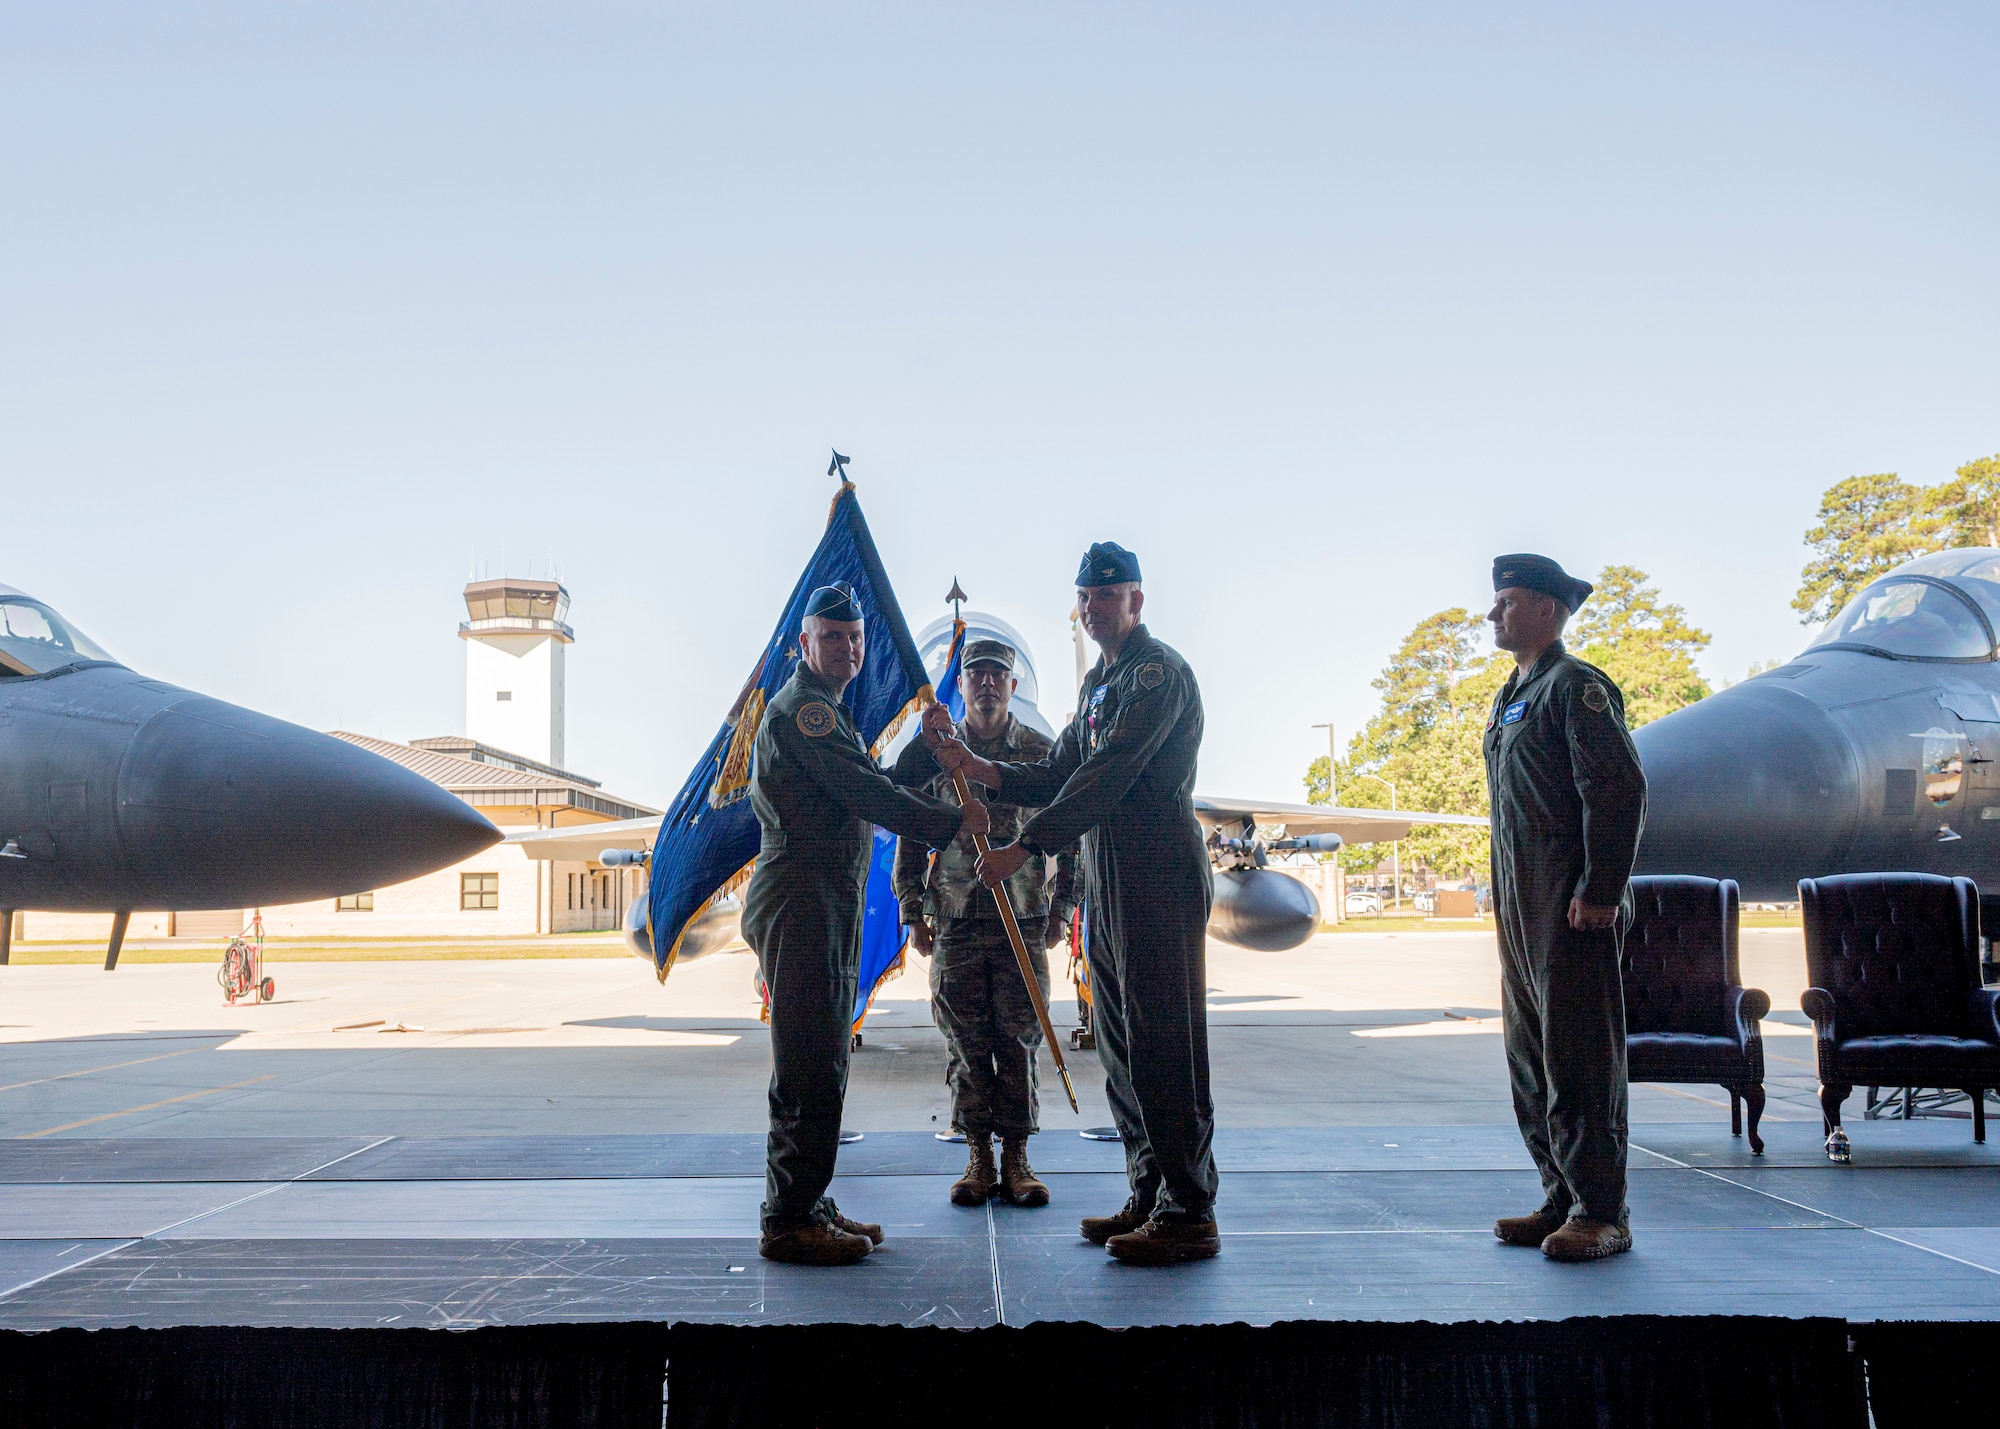 Maj. Gen. Michael G. Koscheski, left, Fifteenth Air Force commander, receives the guidon from Col. Kurt Helphinstine, outgoing 4th Fighter Wing commander, as he relinquishes command of the 4th FW during a Change of Command ceremony at Seymour Johnson Air Force Base, North Carolina, May 11, 2022. Helphinstine was the commander of the 4th FW for approximately two years. (U.S. Air Force photo by Senior Airman Kimberly Barrera)